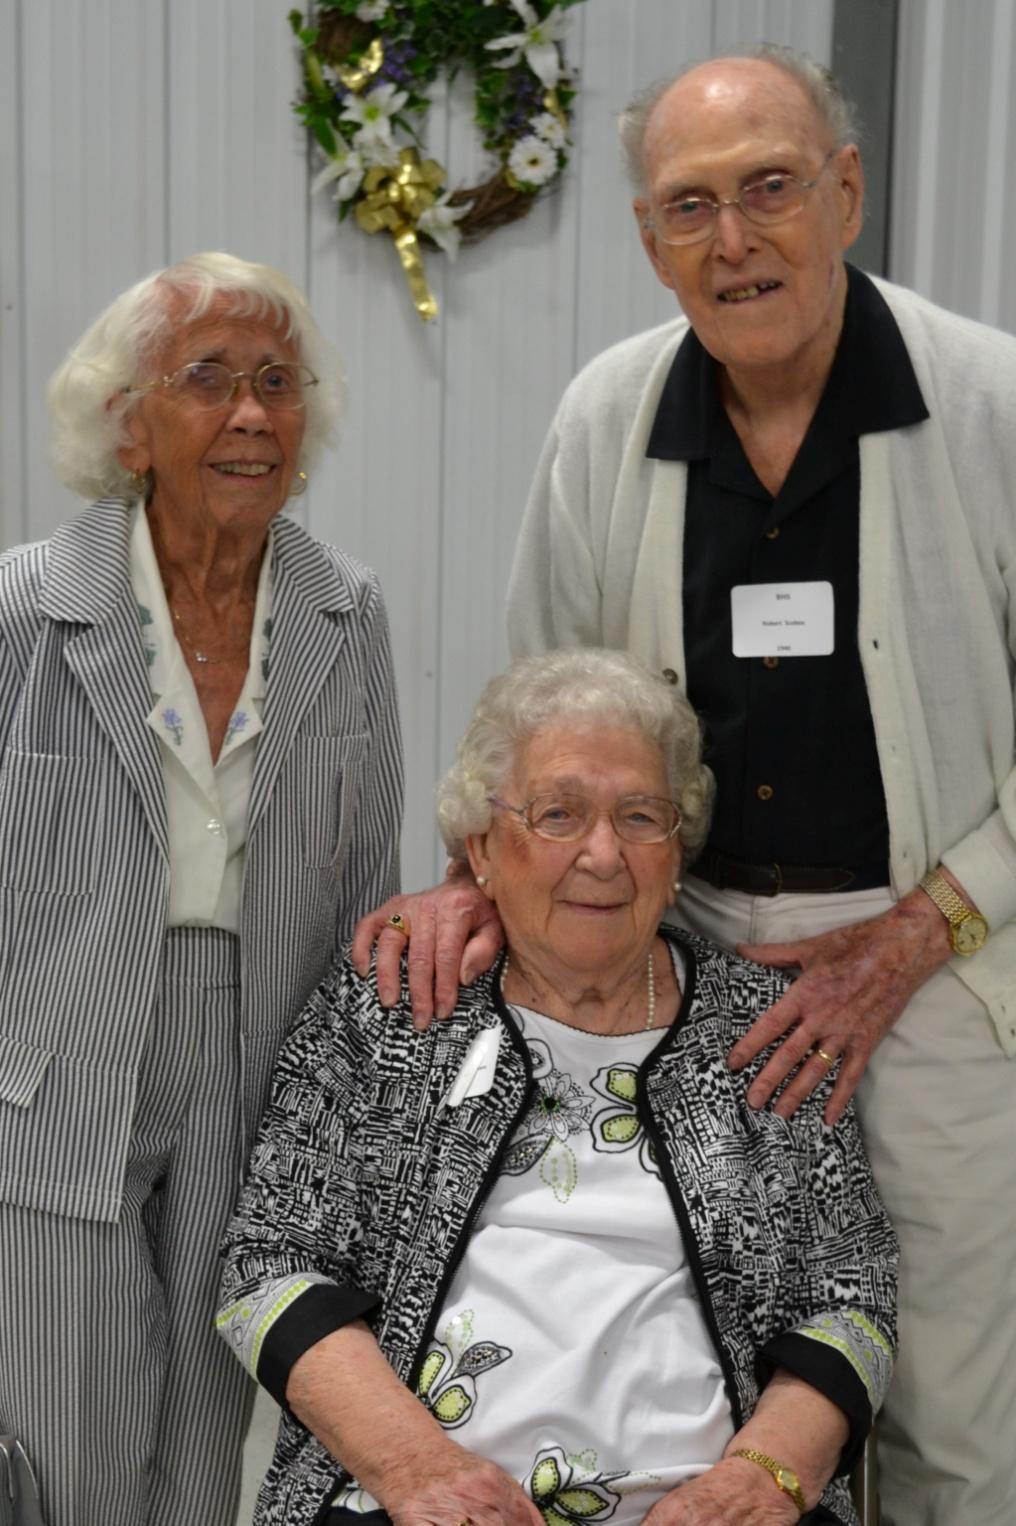 Recognized from the 80 & 75 year graduating classes were: standing Lucile Nichols Burkett, class of